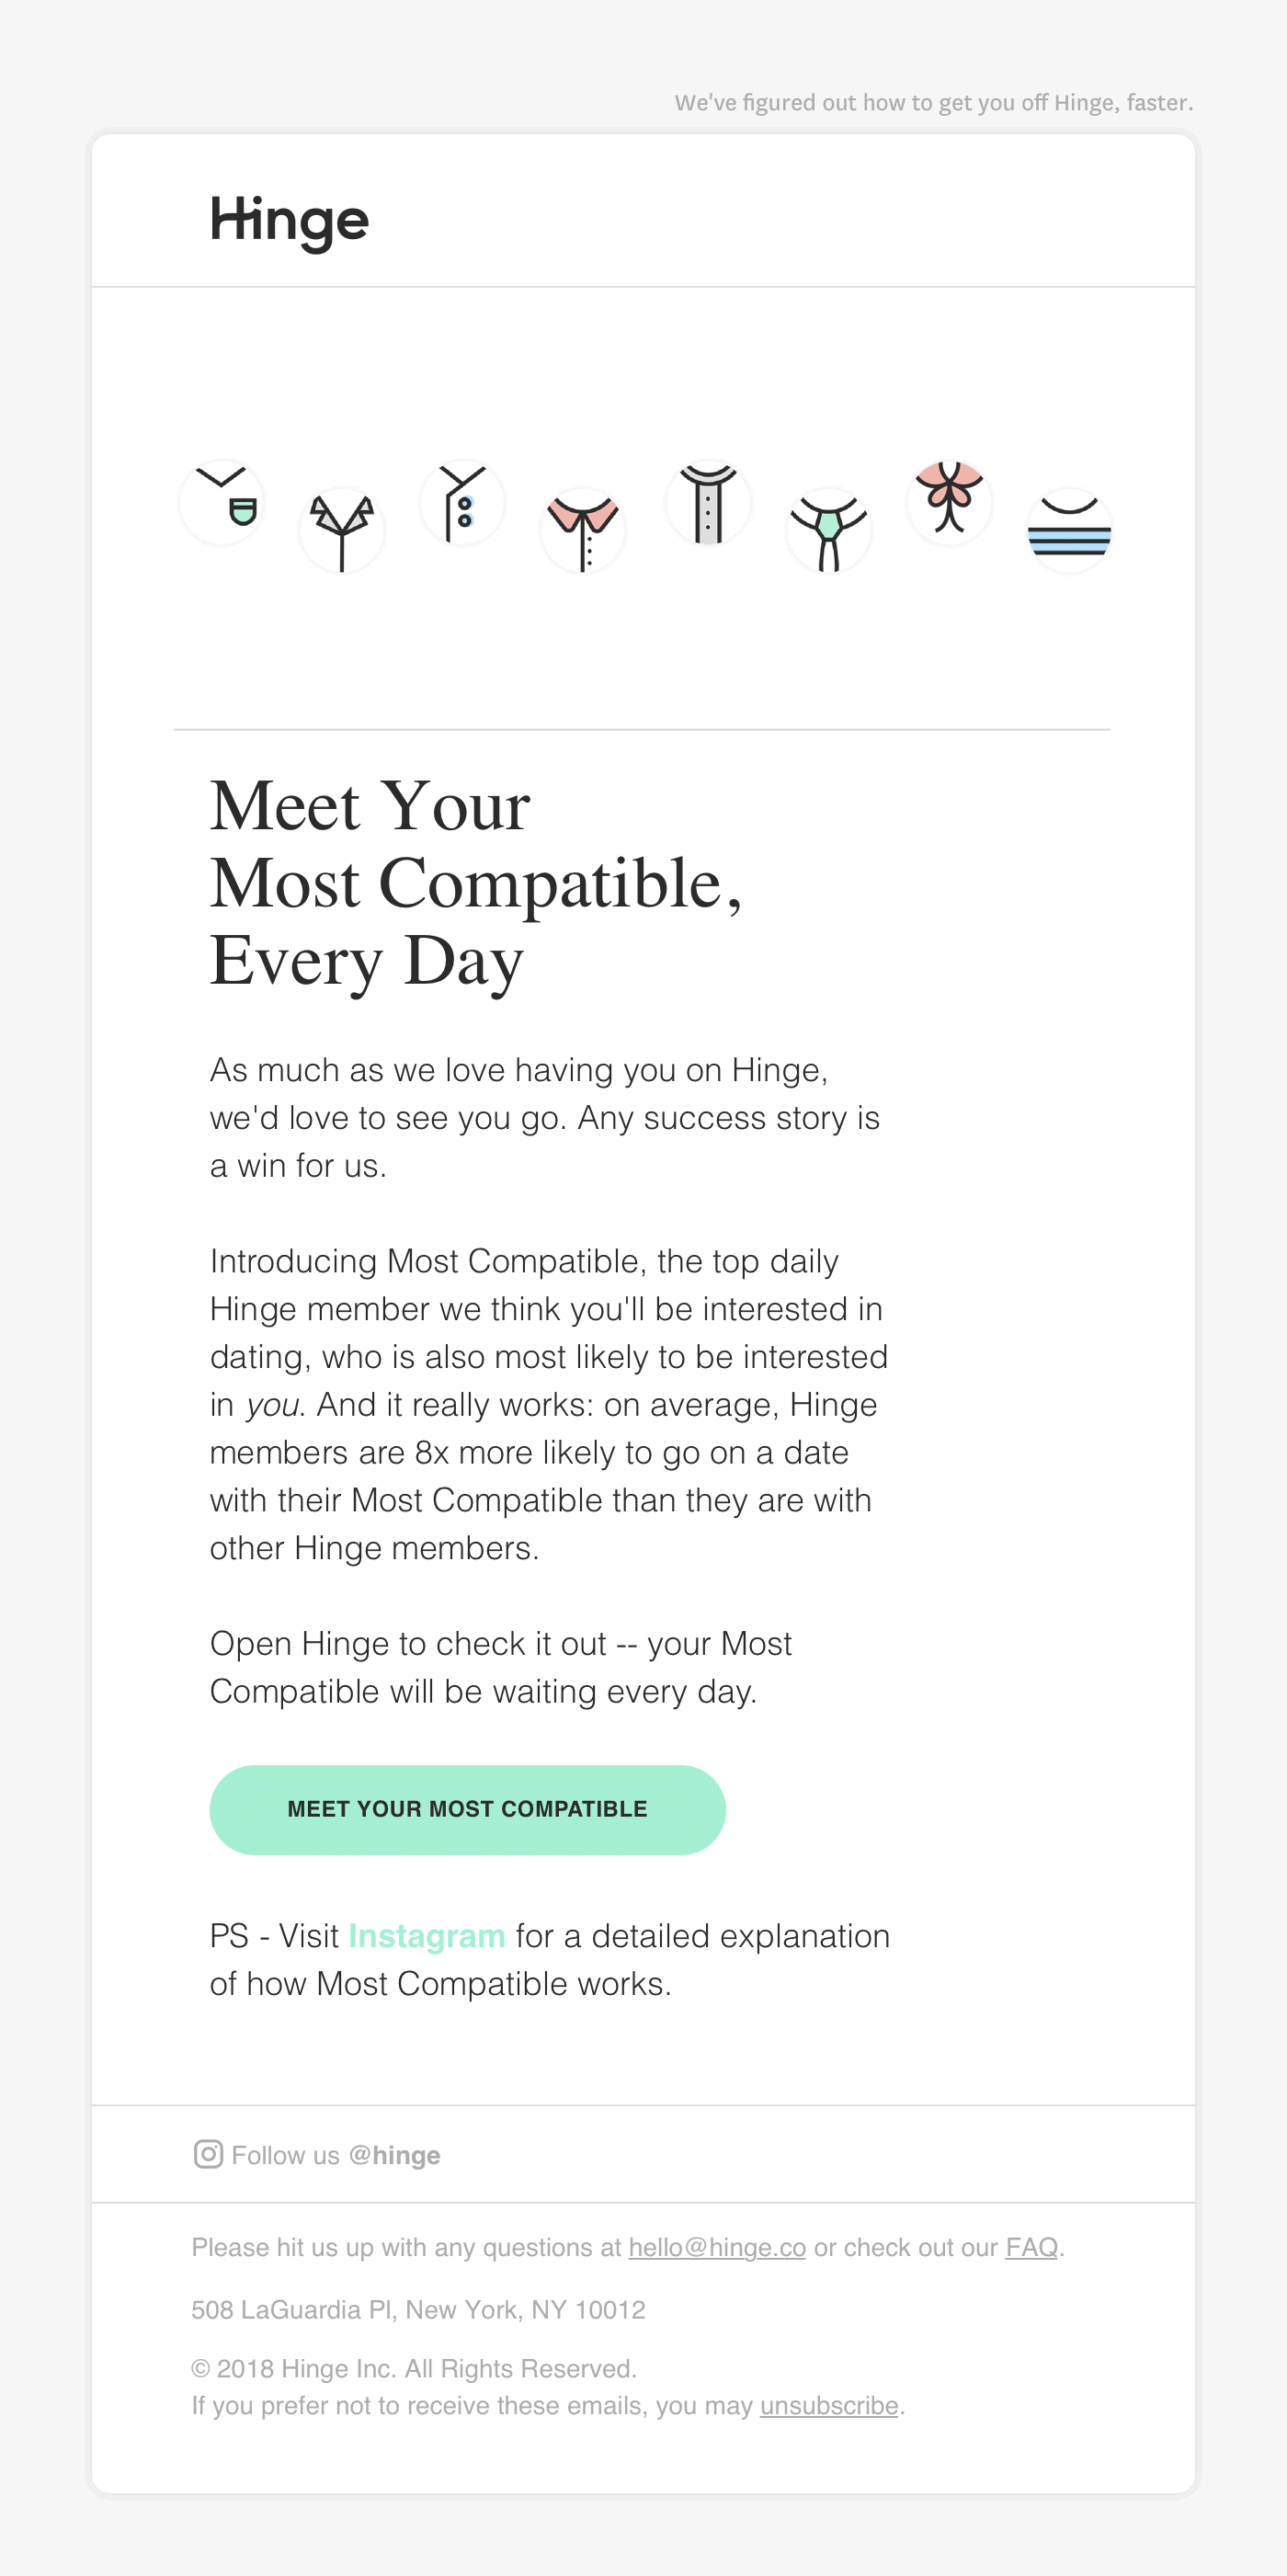 The email Hinge will be sending to users about the new feature.